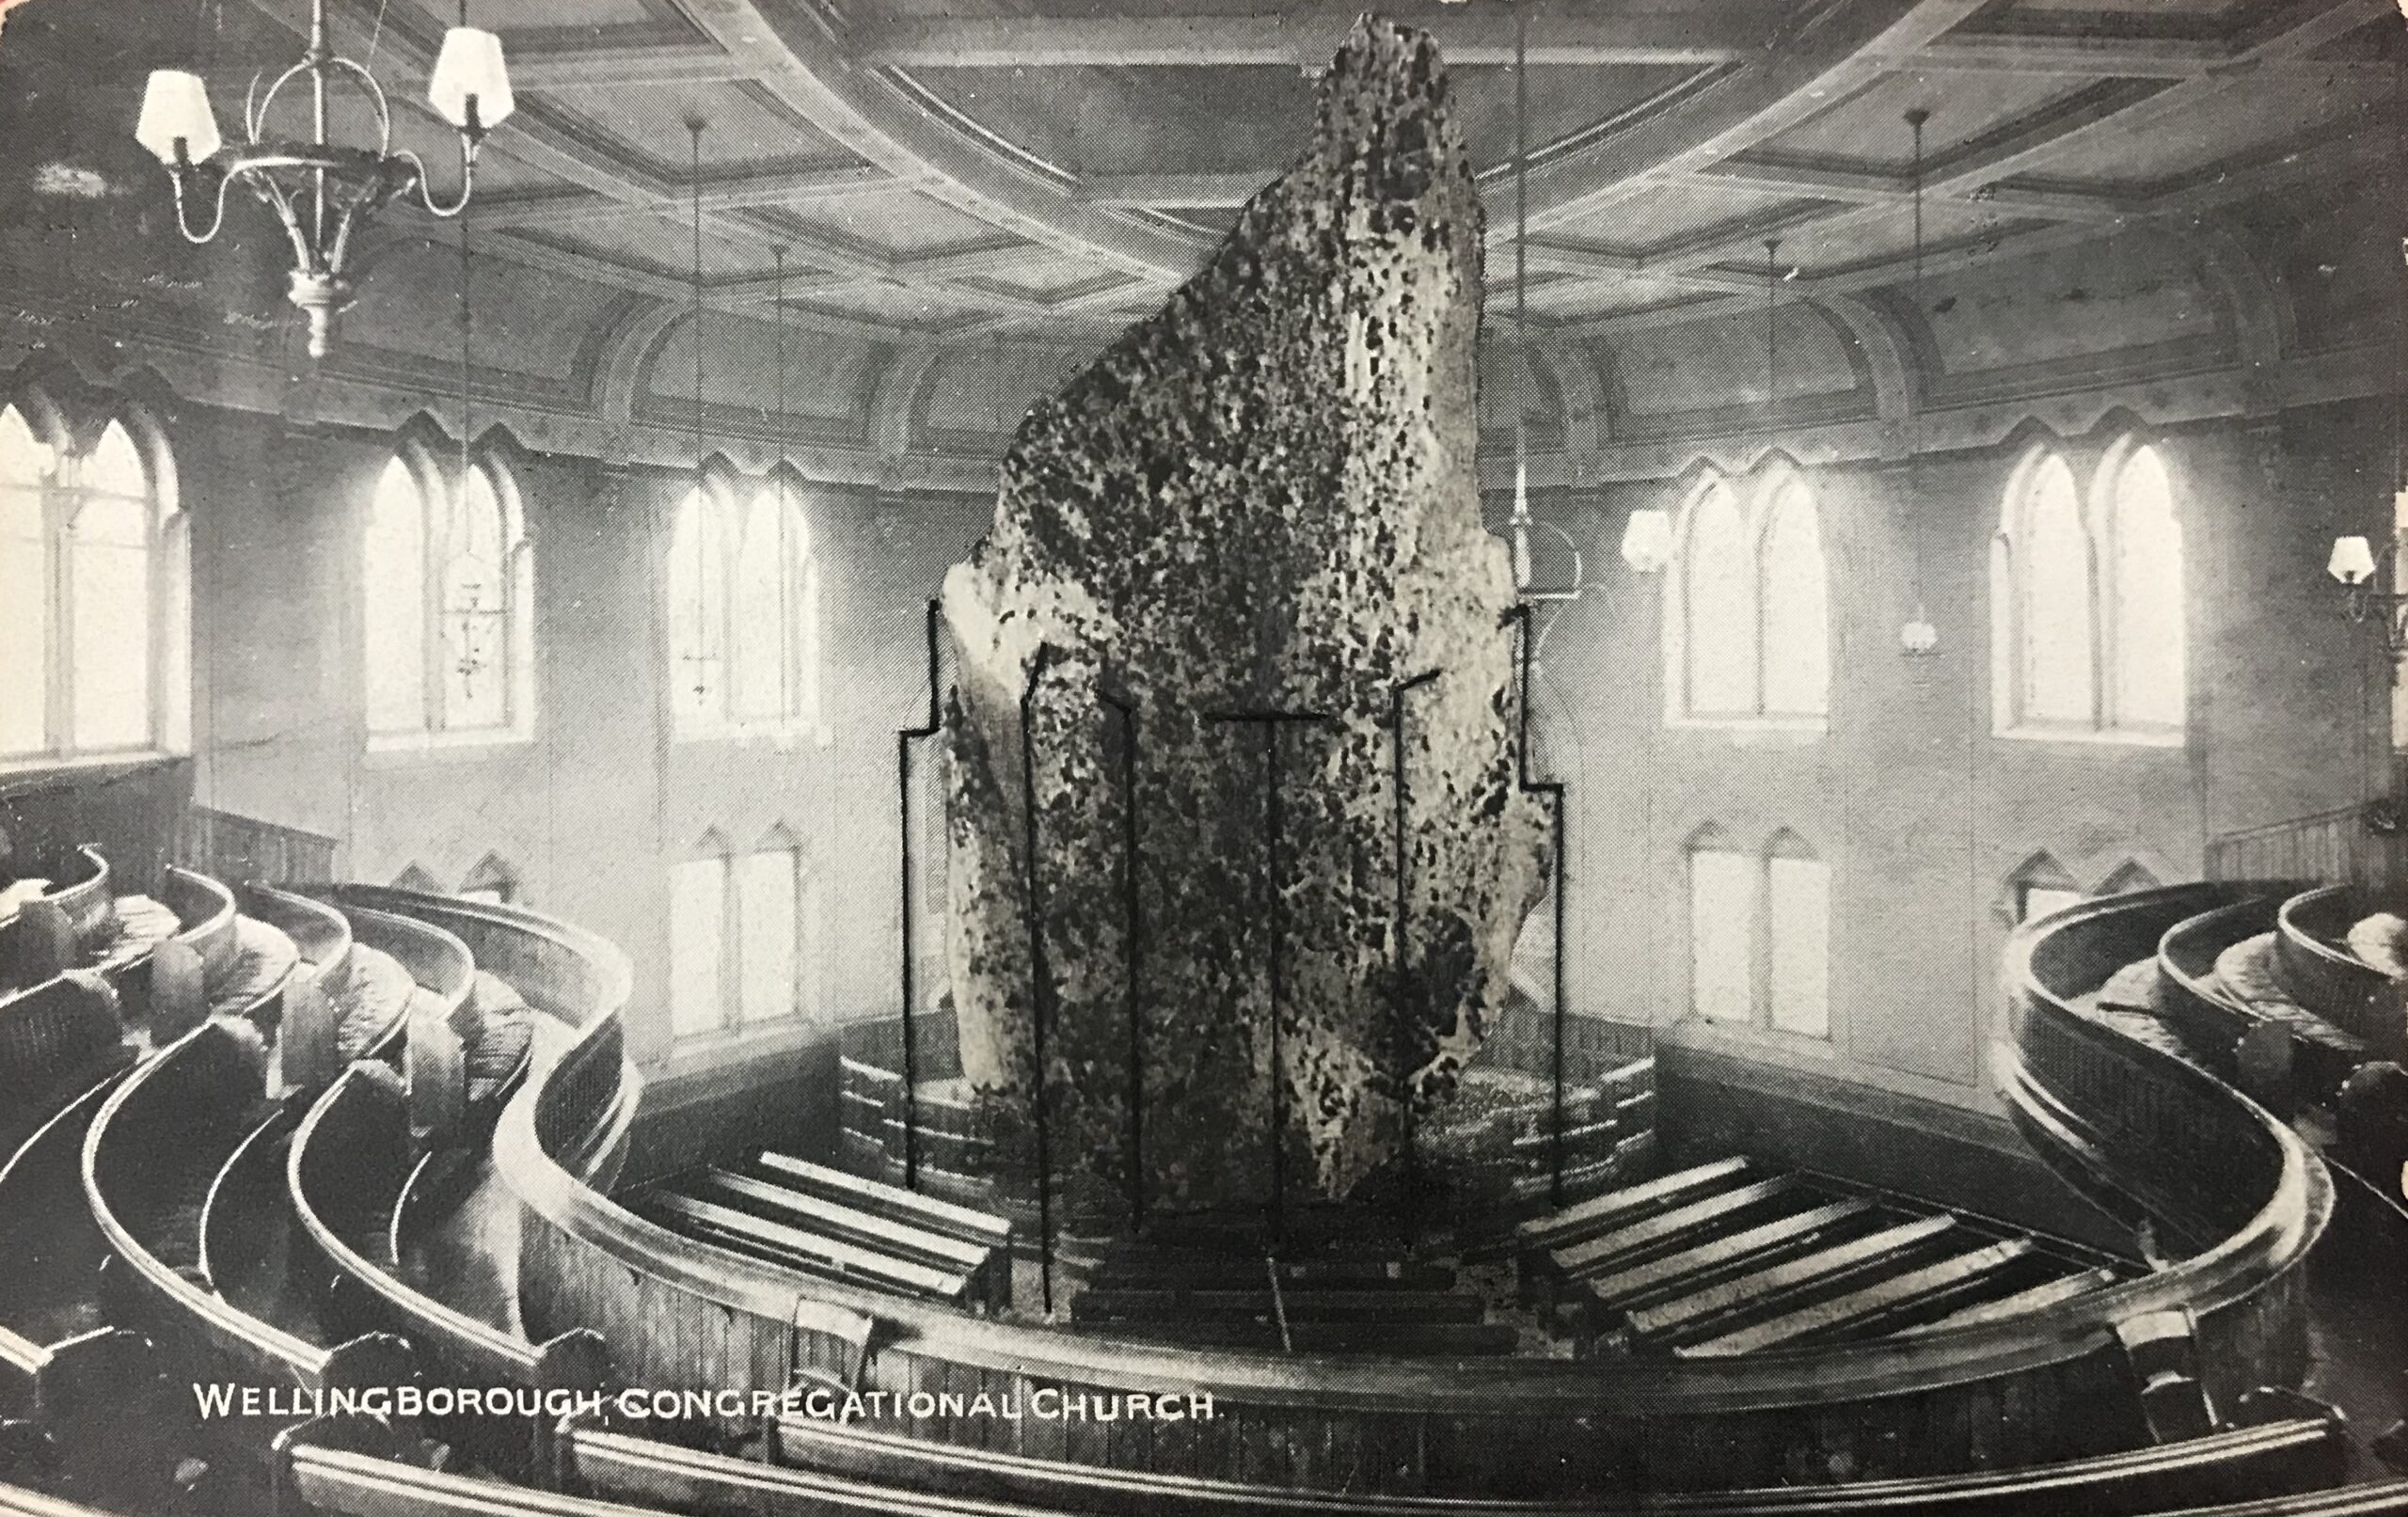 Black and white postcard of the inside of a large round building with shaped wooden seating surrounding a central dais. On the dais a huge rock reaches up to the ceiling, held in place with rods made of thread.